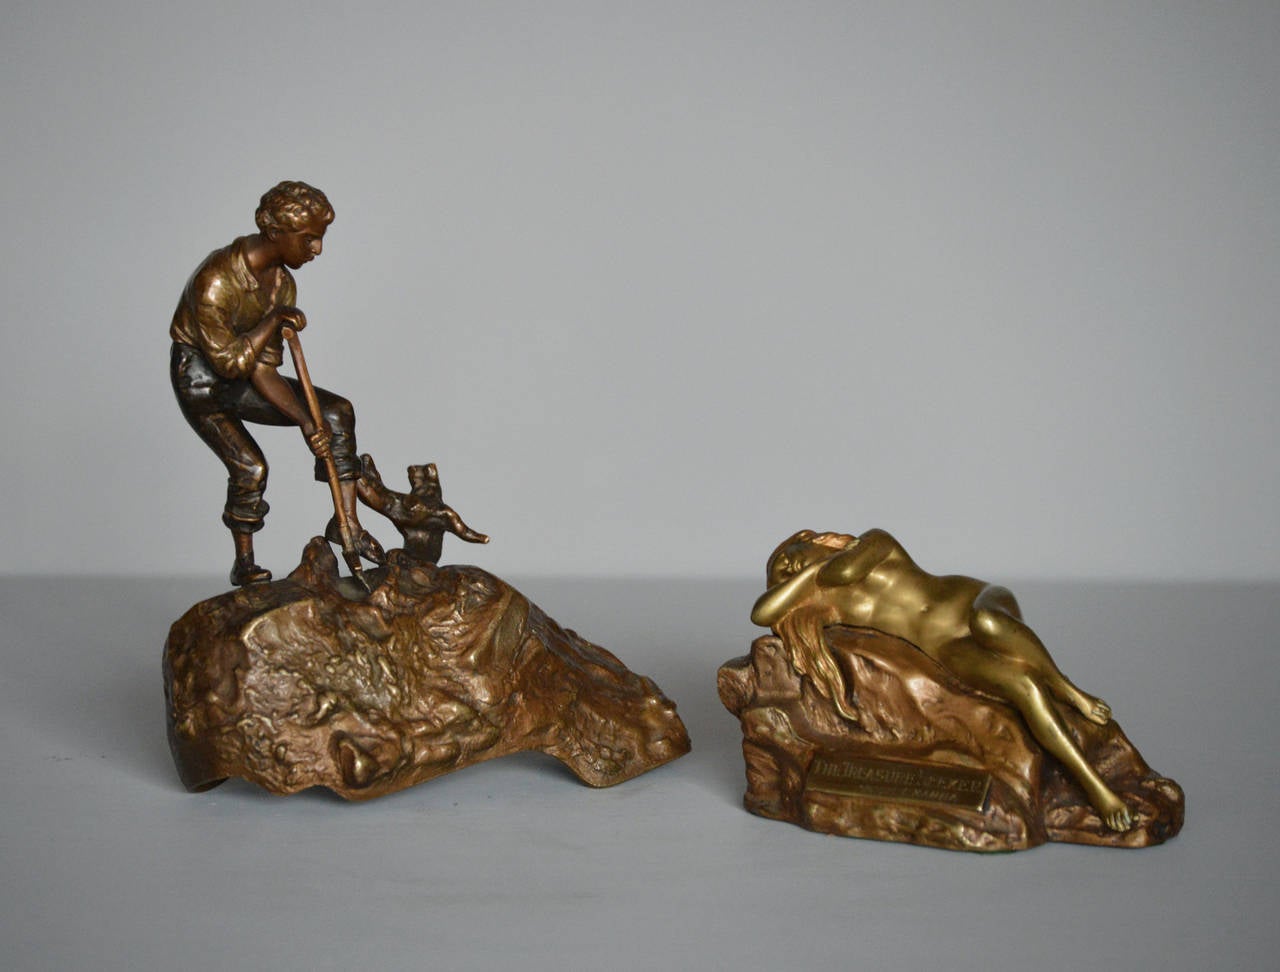 Carl Kauba
Austrian, (1865-1922)
The Treasure Seeker
Bronze, signed
Height: 7½ inches
Width: 5¾ inches
Depth: 2¾ inches

An early 20th century metamorphic patinated and gilt bronze sculpture. A patinated figure of a young man holds a spade